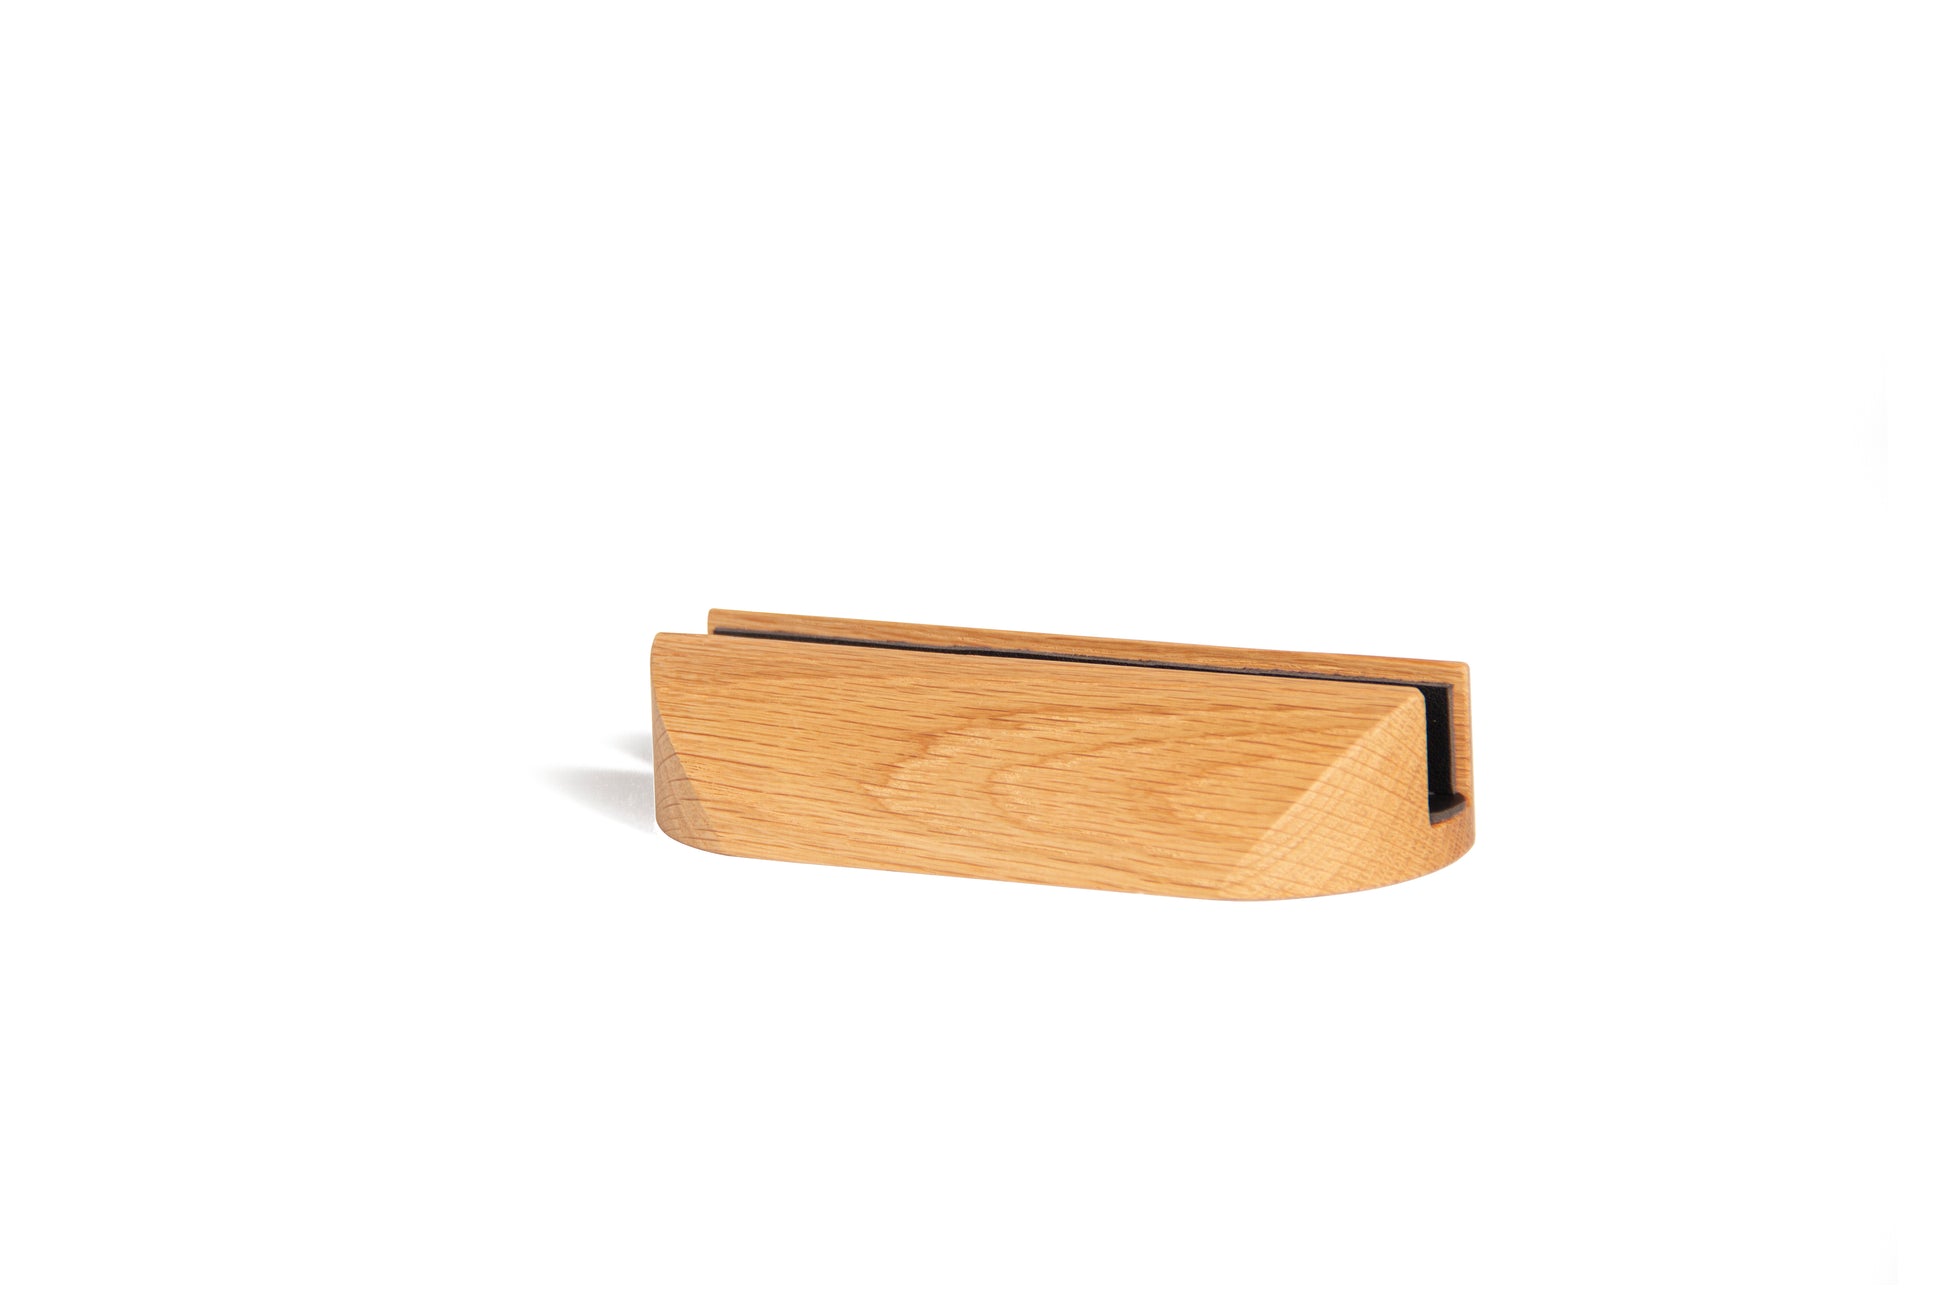 woodendot loma stand in oak on white background